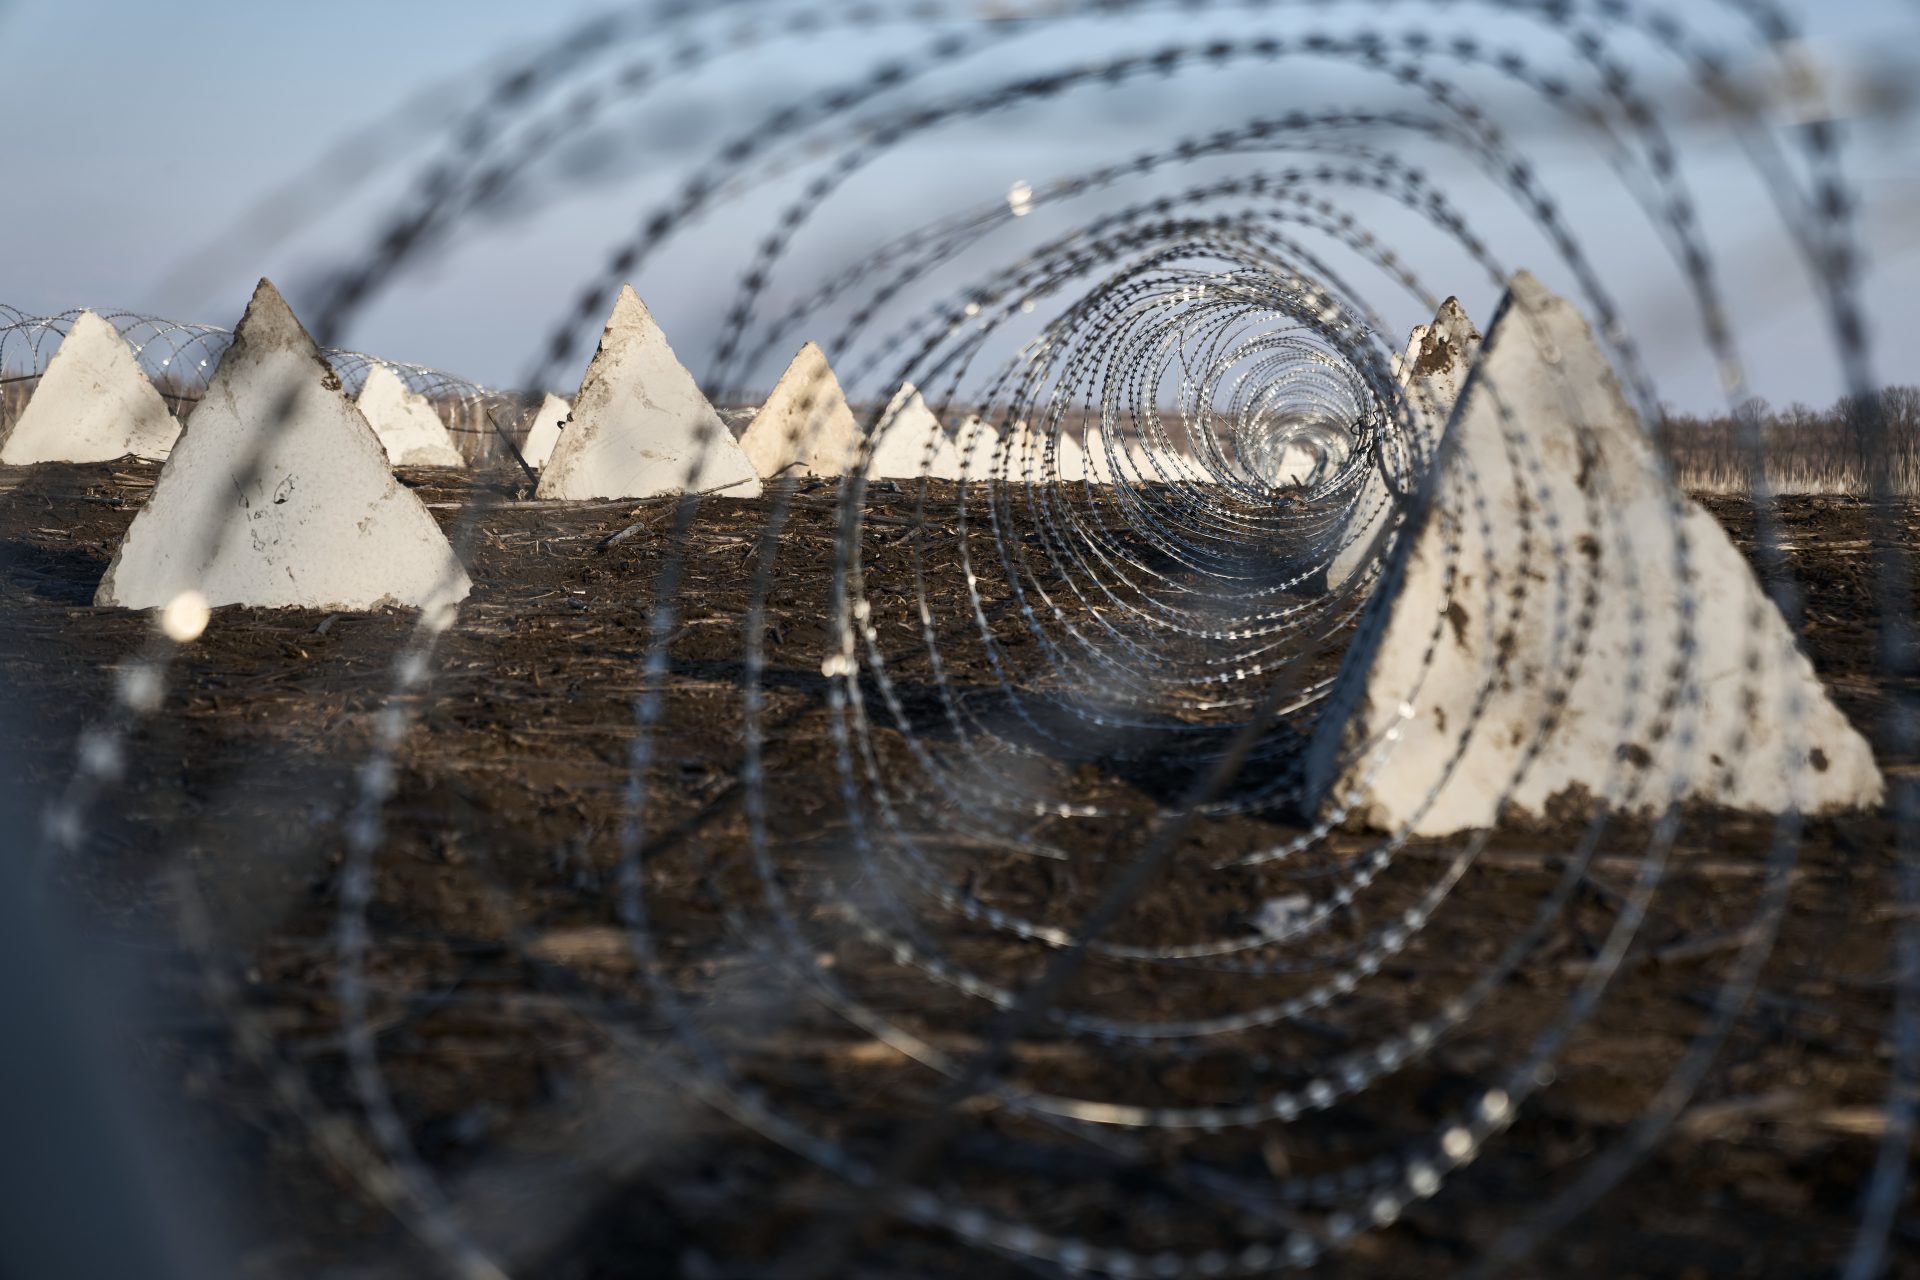 The razor wire has a purpose as well